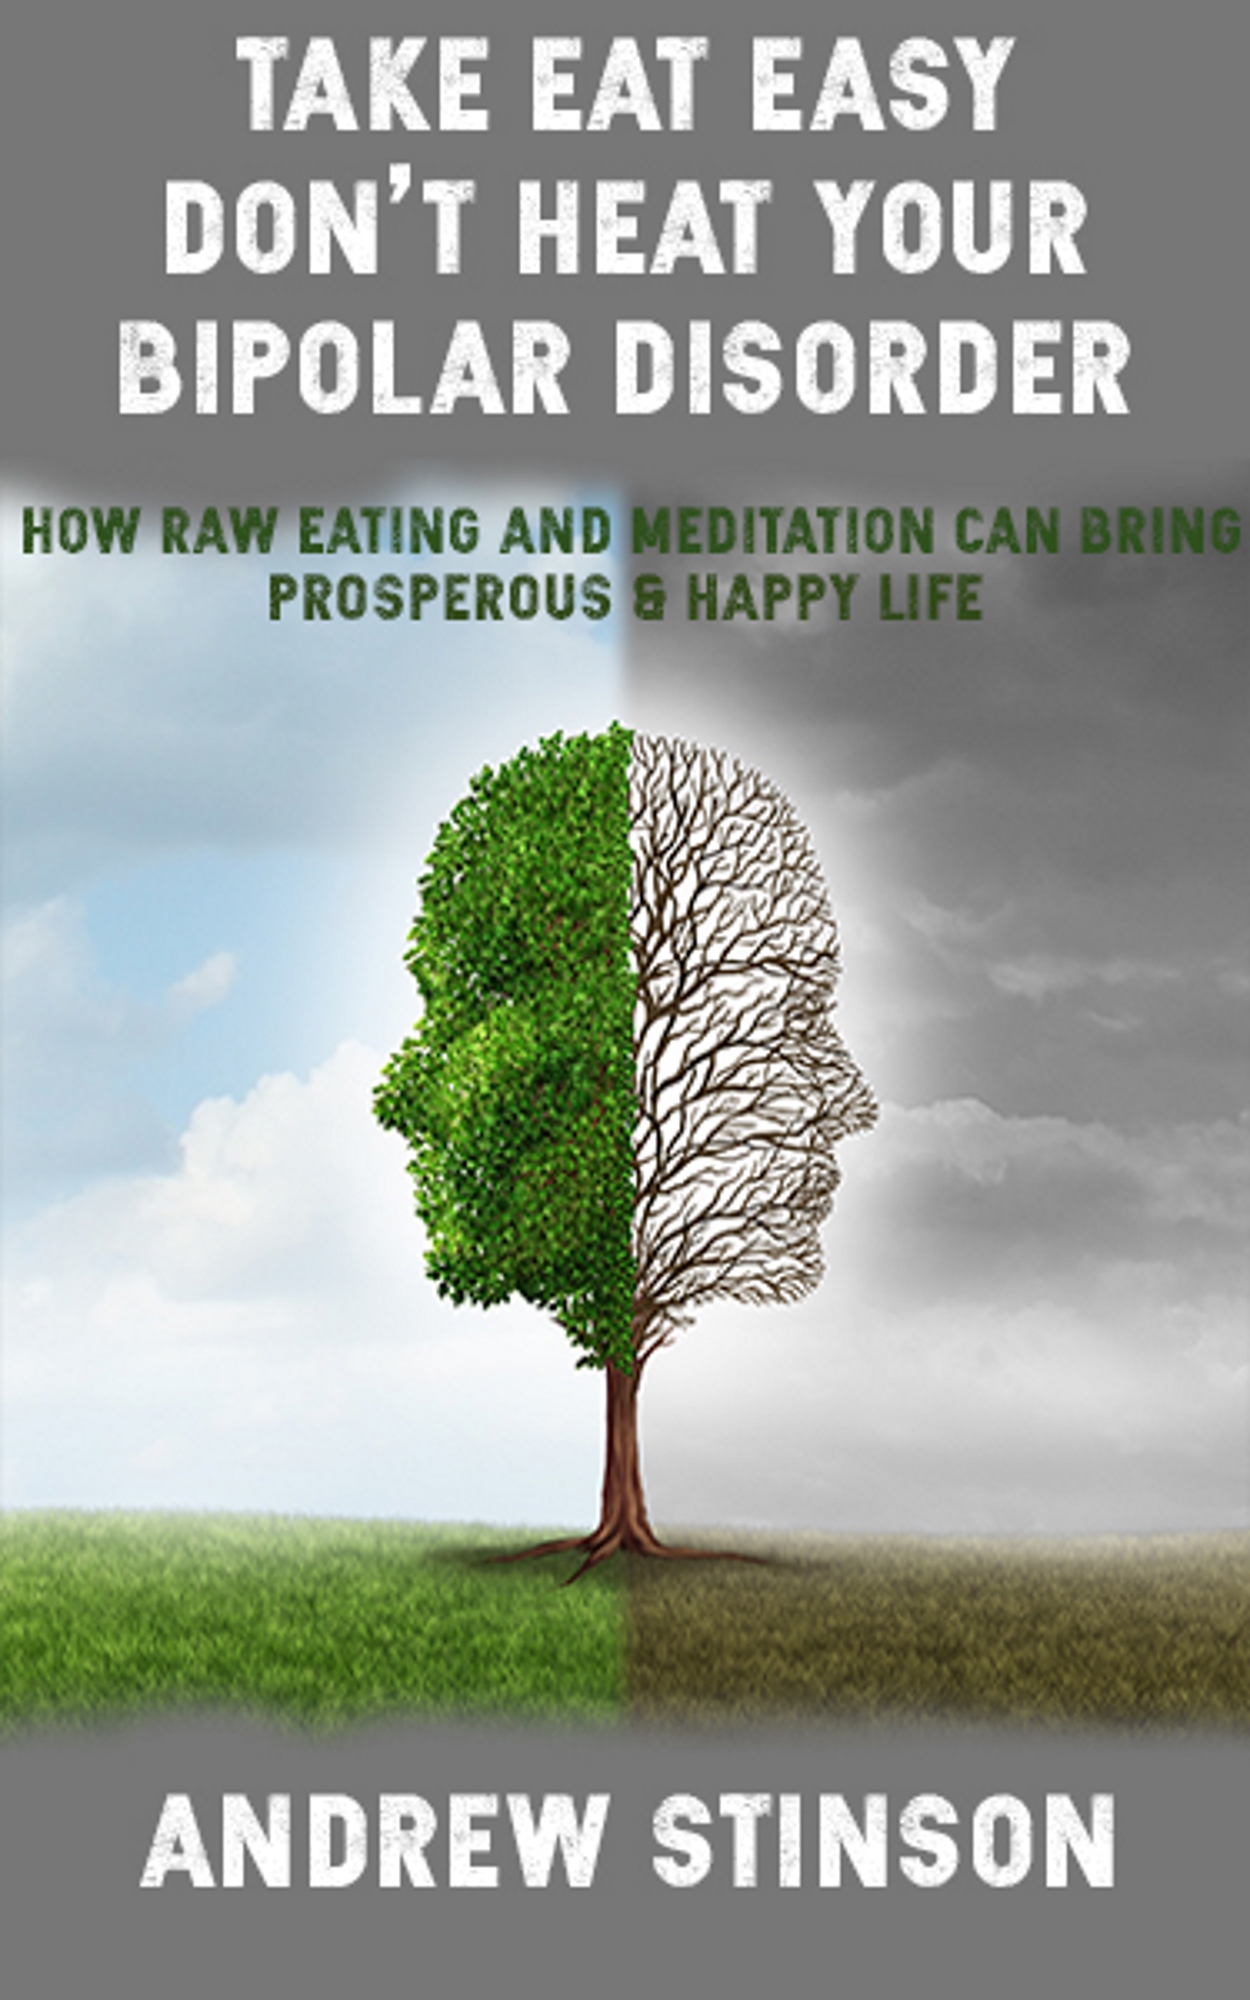 FREE: Take Eat Easy – Don’t Heat Your Bipolar Disorder: How Raw Eating and Meditation can bring Prosperous & Happy Life by Andrew Stinson